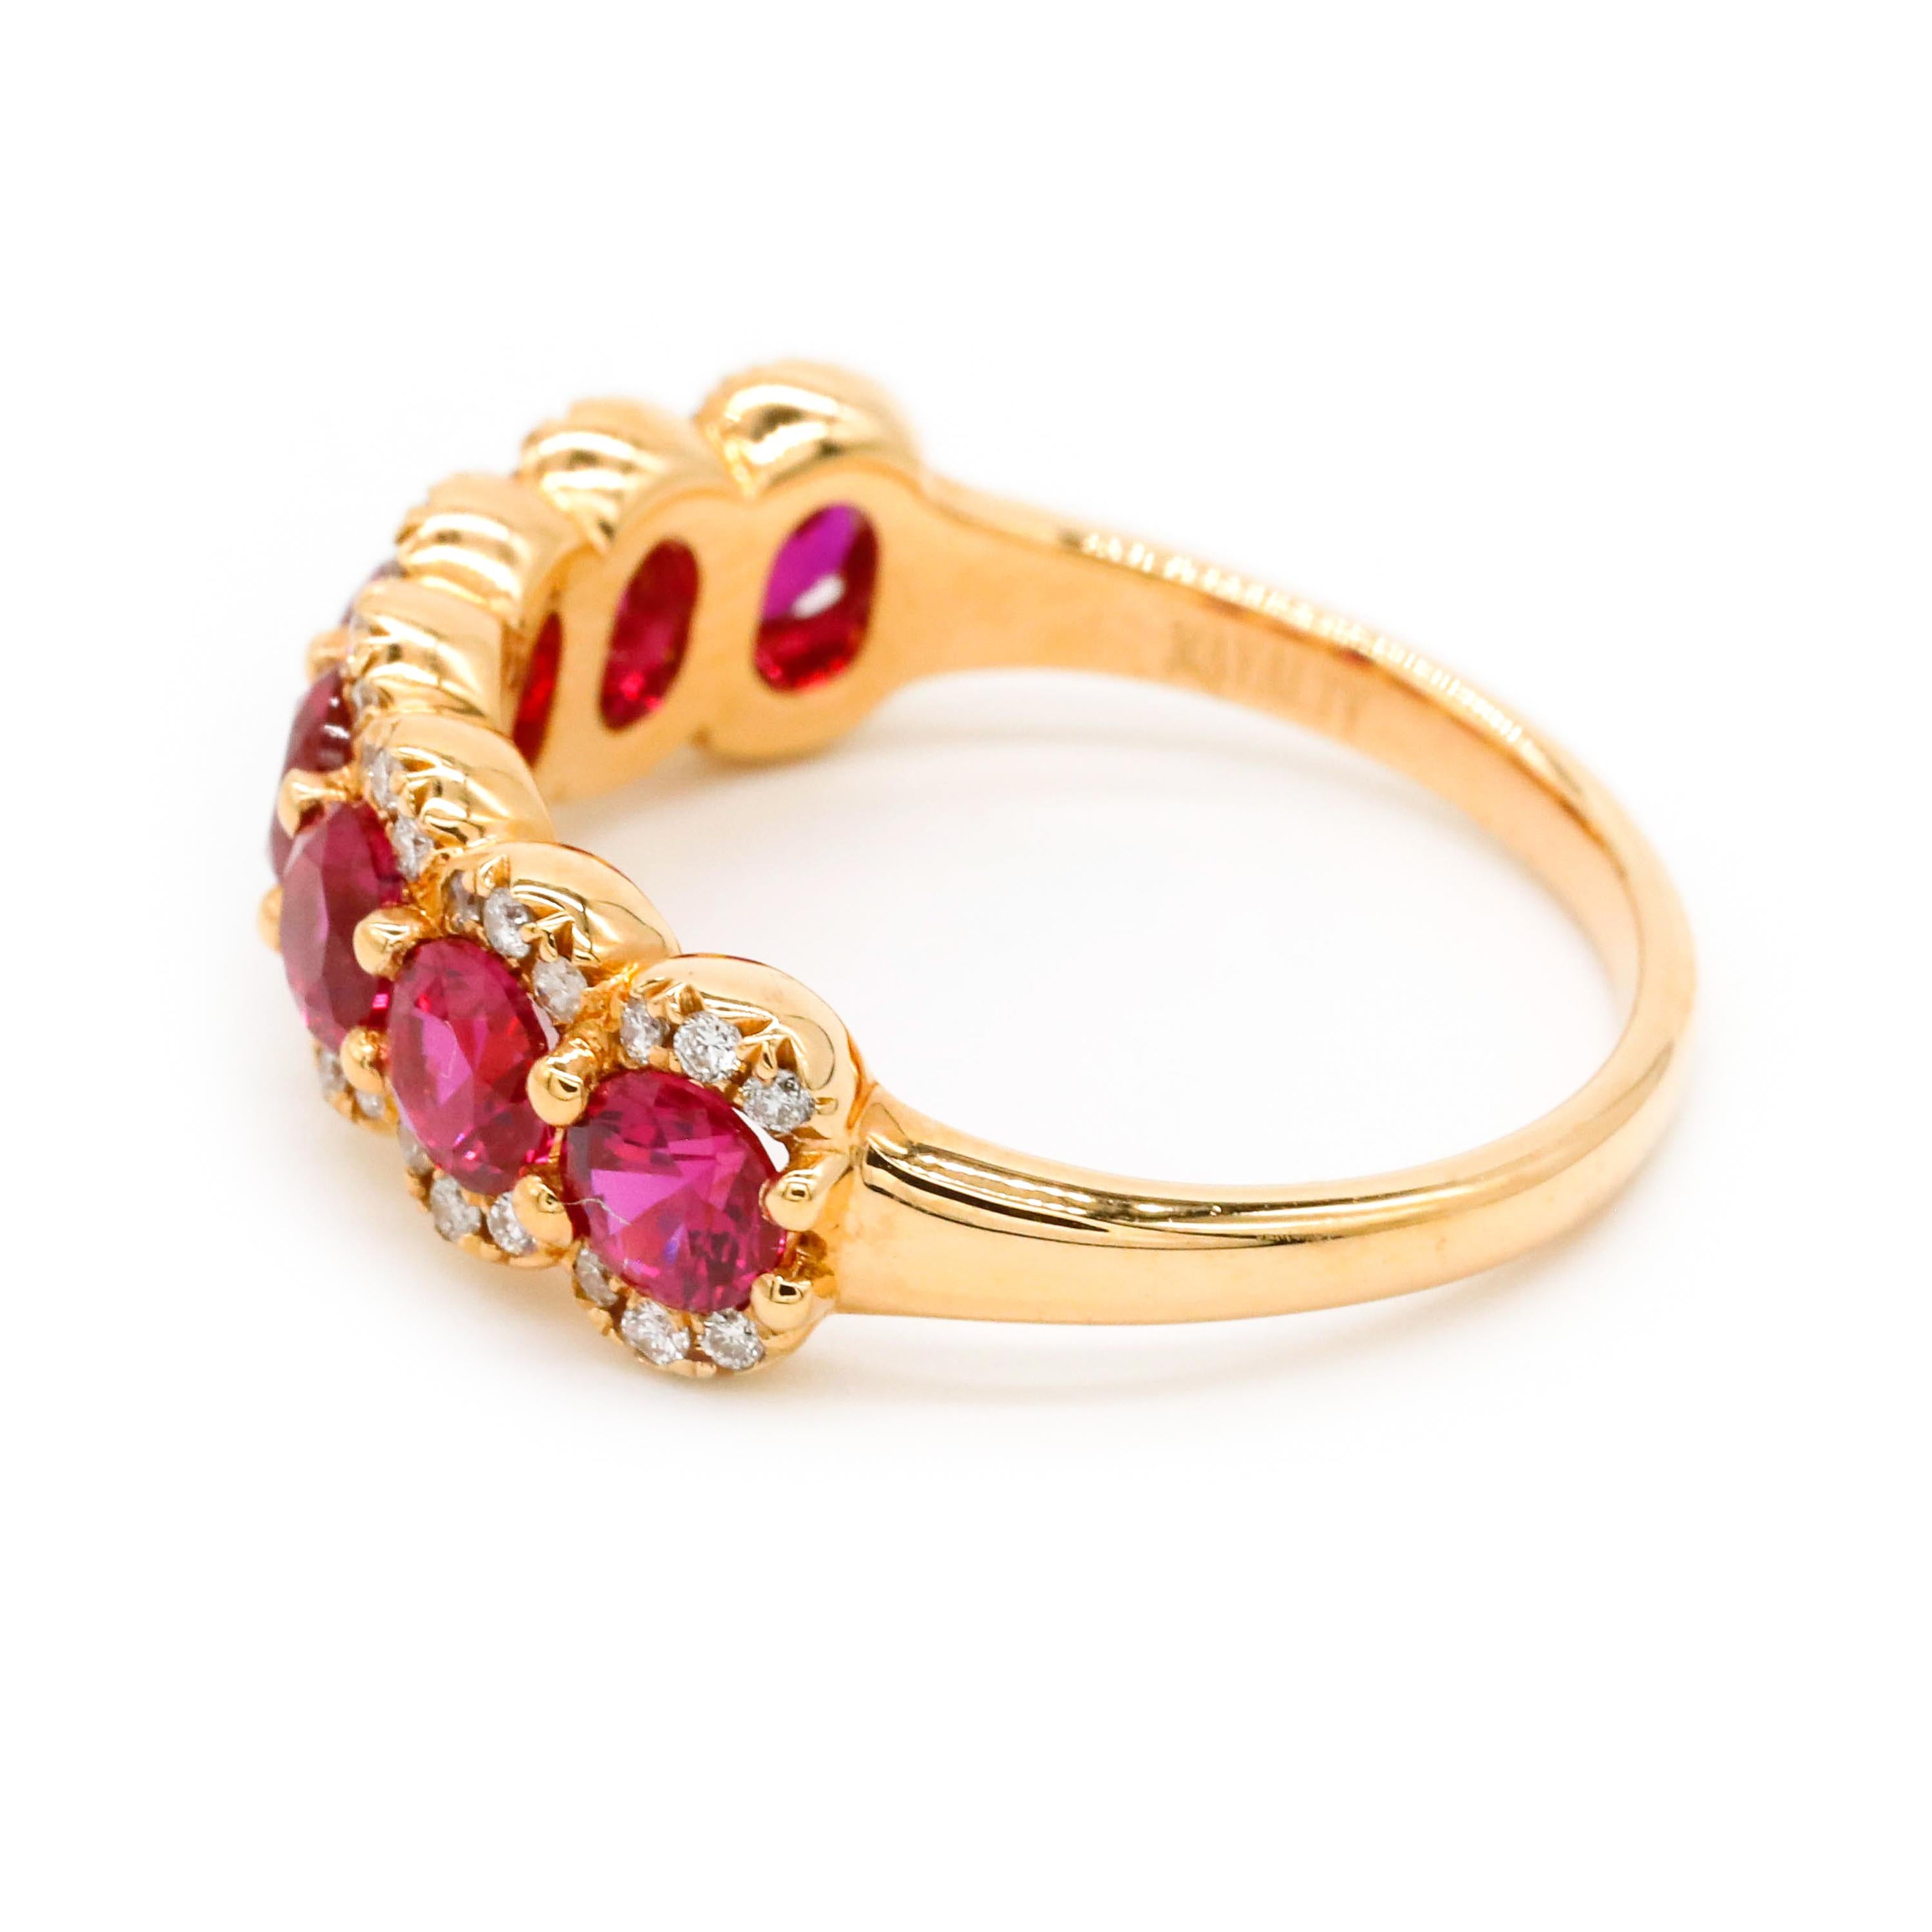 4.30 TCW Round Cut Ruby Prong Set Diamond Band Ring in 18 k Gold Yellow Jewelry

A wedding band or an Anniversary ring - this ring is just perfection. Featuring a single row of 4.30 TCW natural ruby stones of Round cut, set in a prong setting.